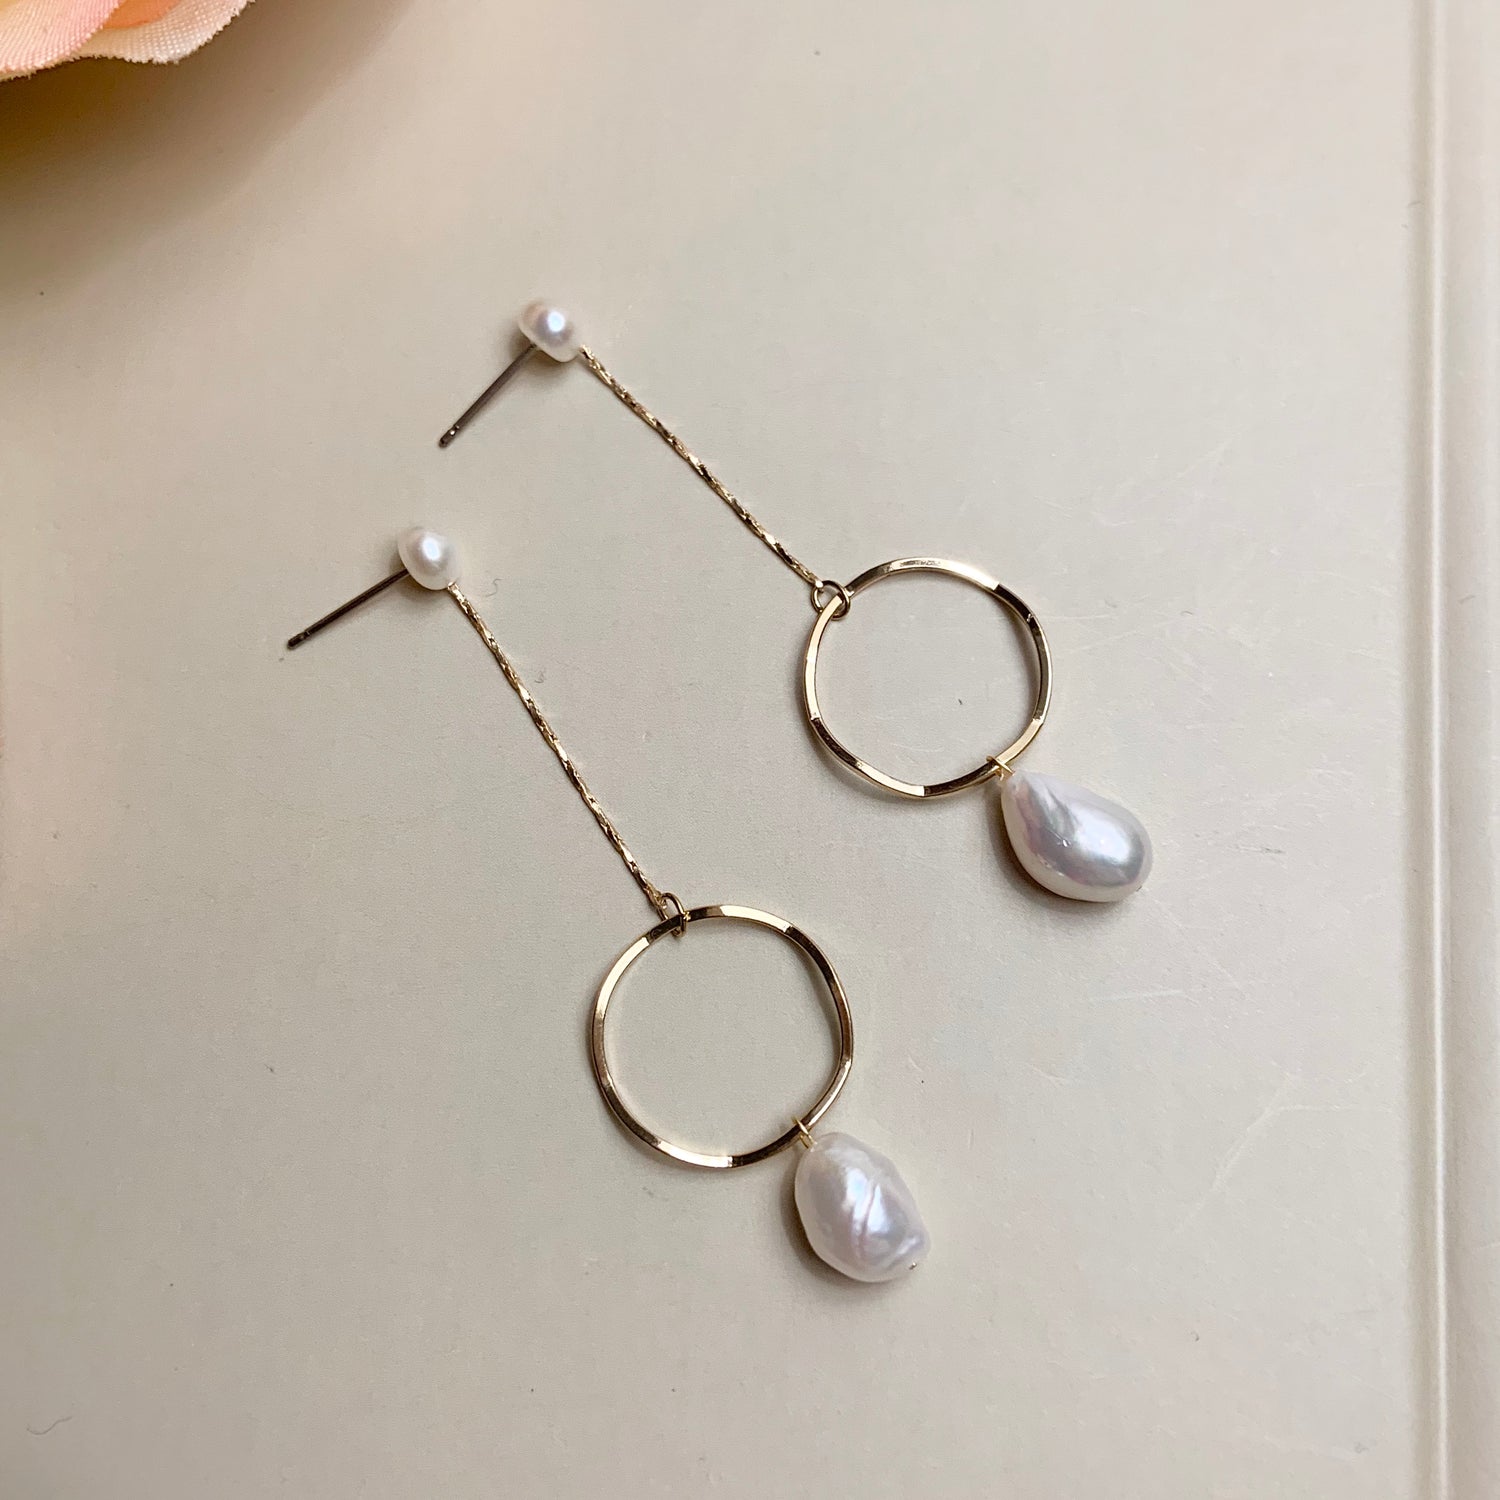 Freshwater Pearls and Circle Long Dangle Earrings - MARMELO USA